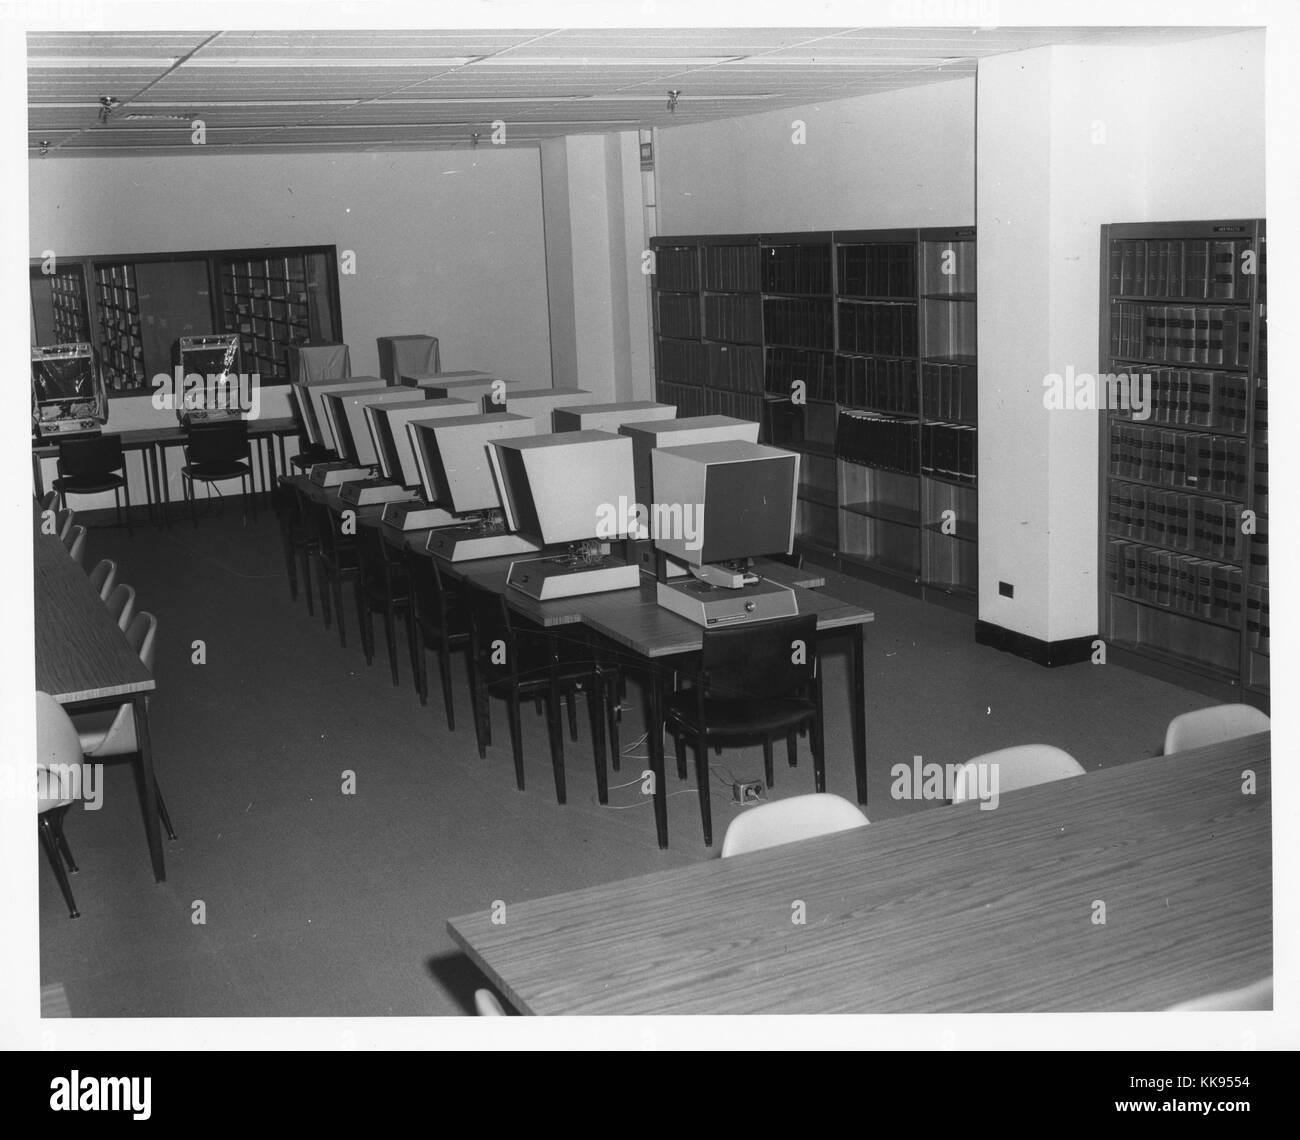 Black and white photograph of a room with a group of microfilm viewers in the center, long tables with chairs, and shelves with books along the walls, New York City, New York, 1970. From the New York Public Library. Stock Photo